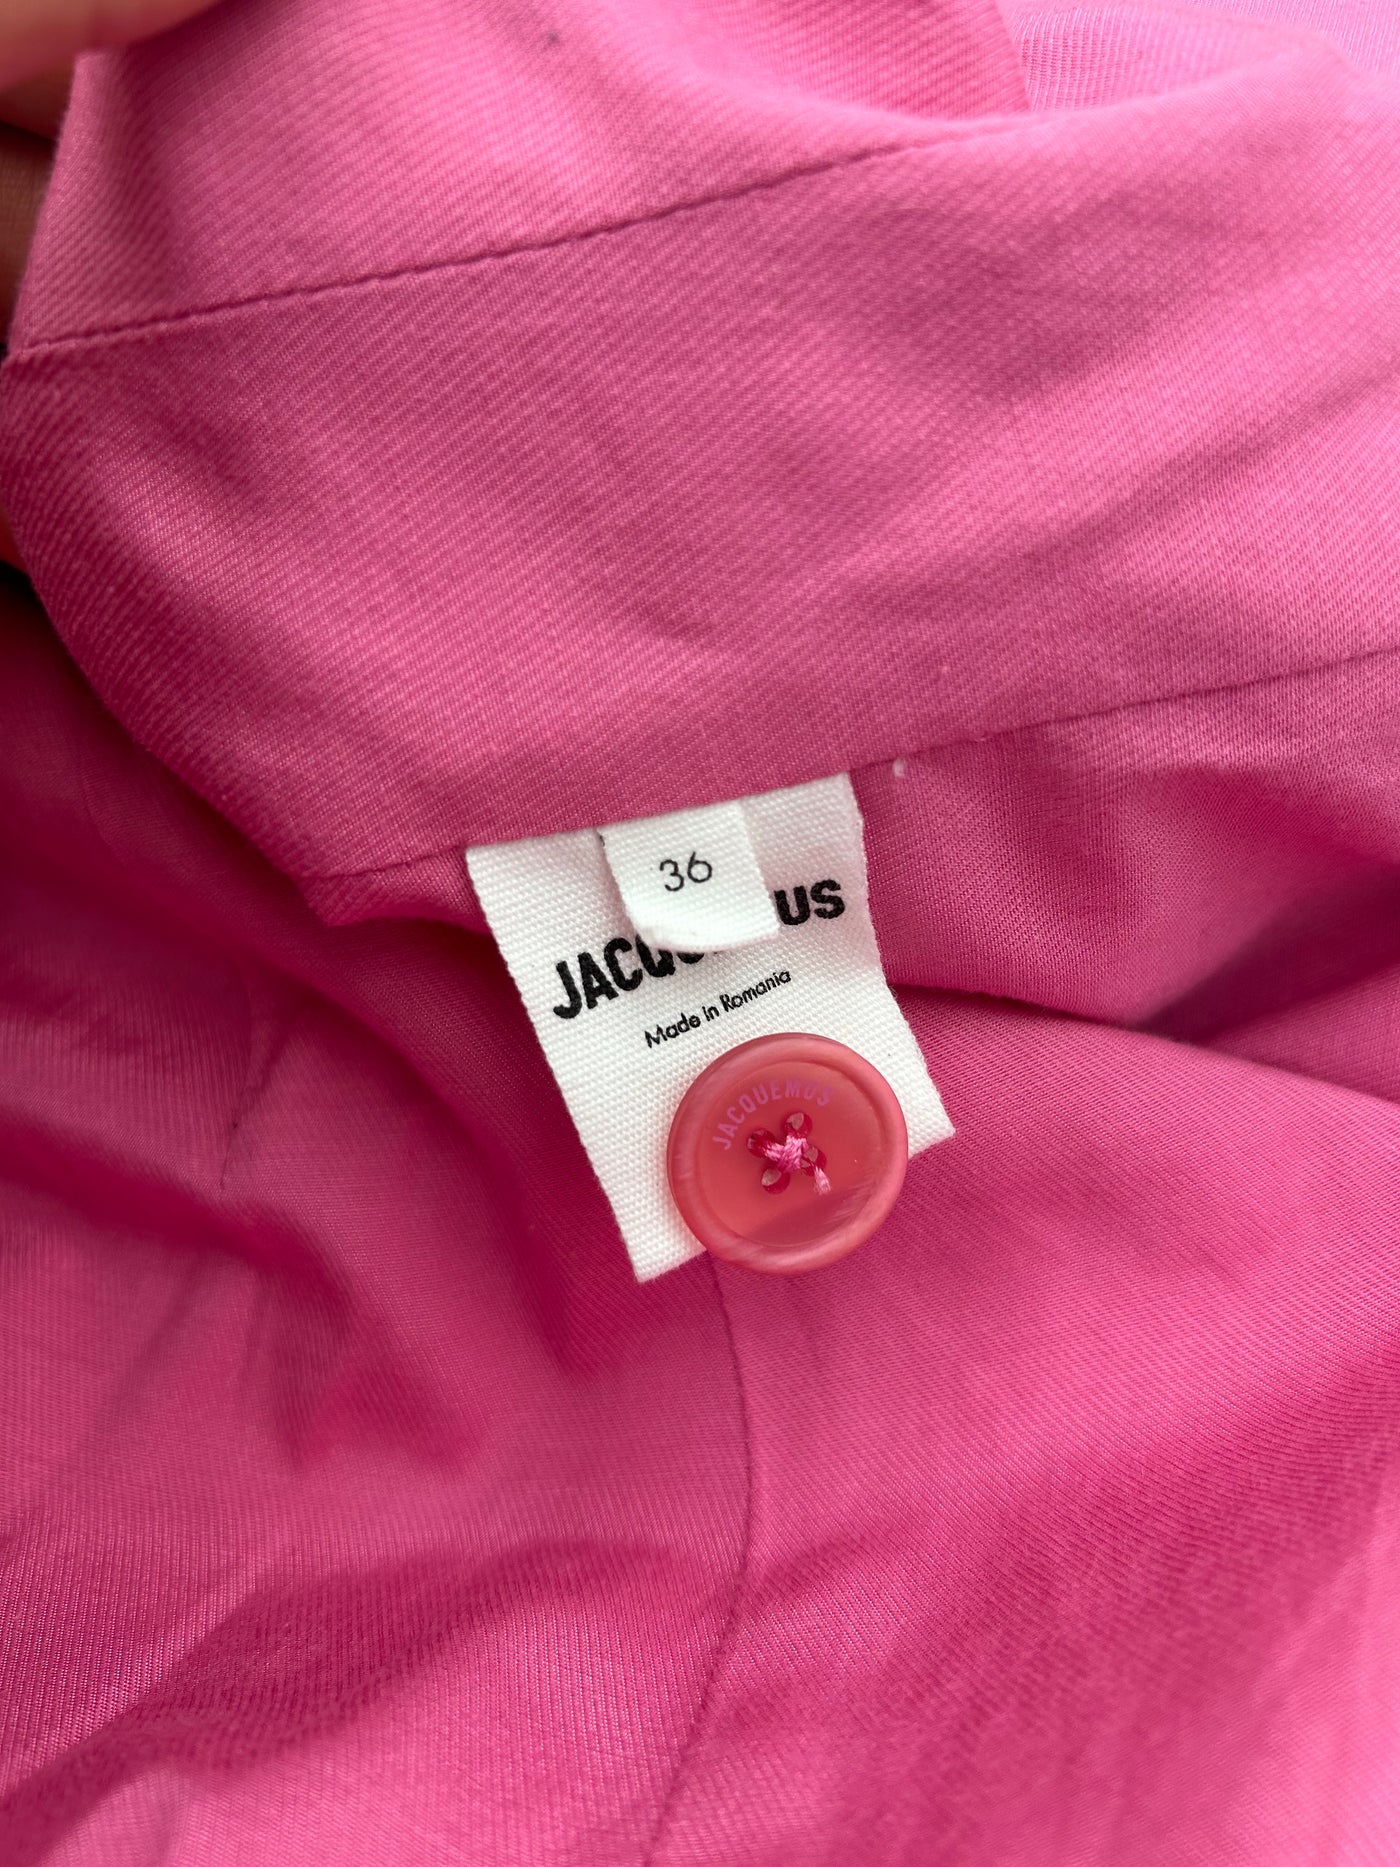 JAQUEMUS pink two pieces suit size 36